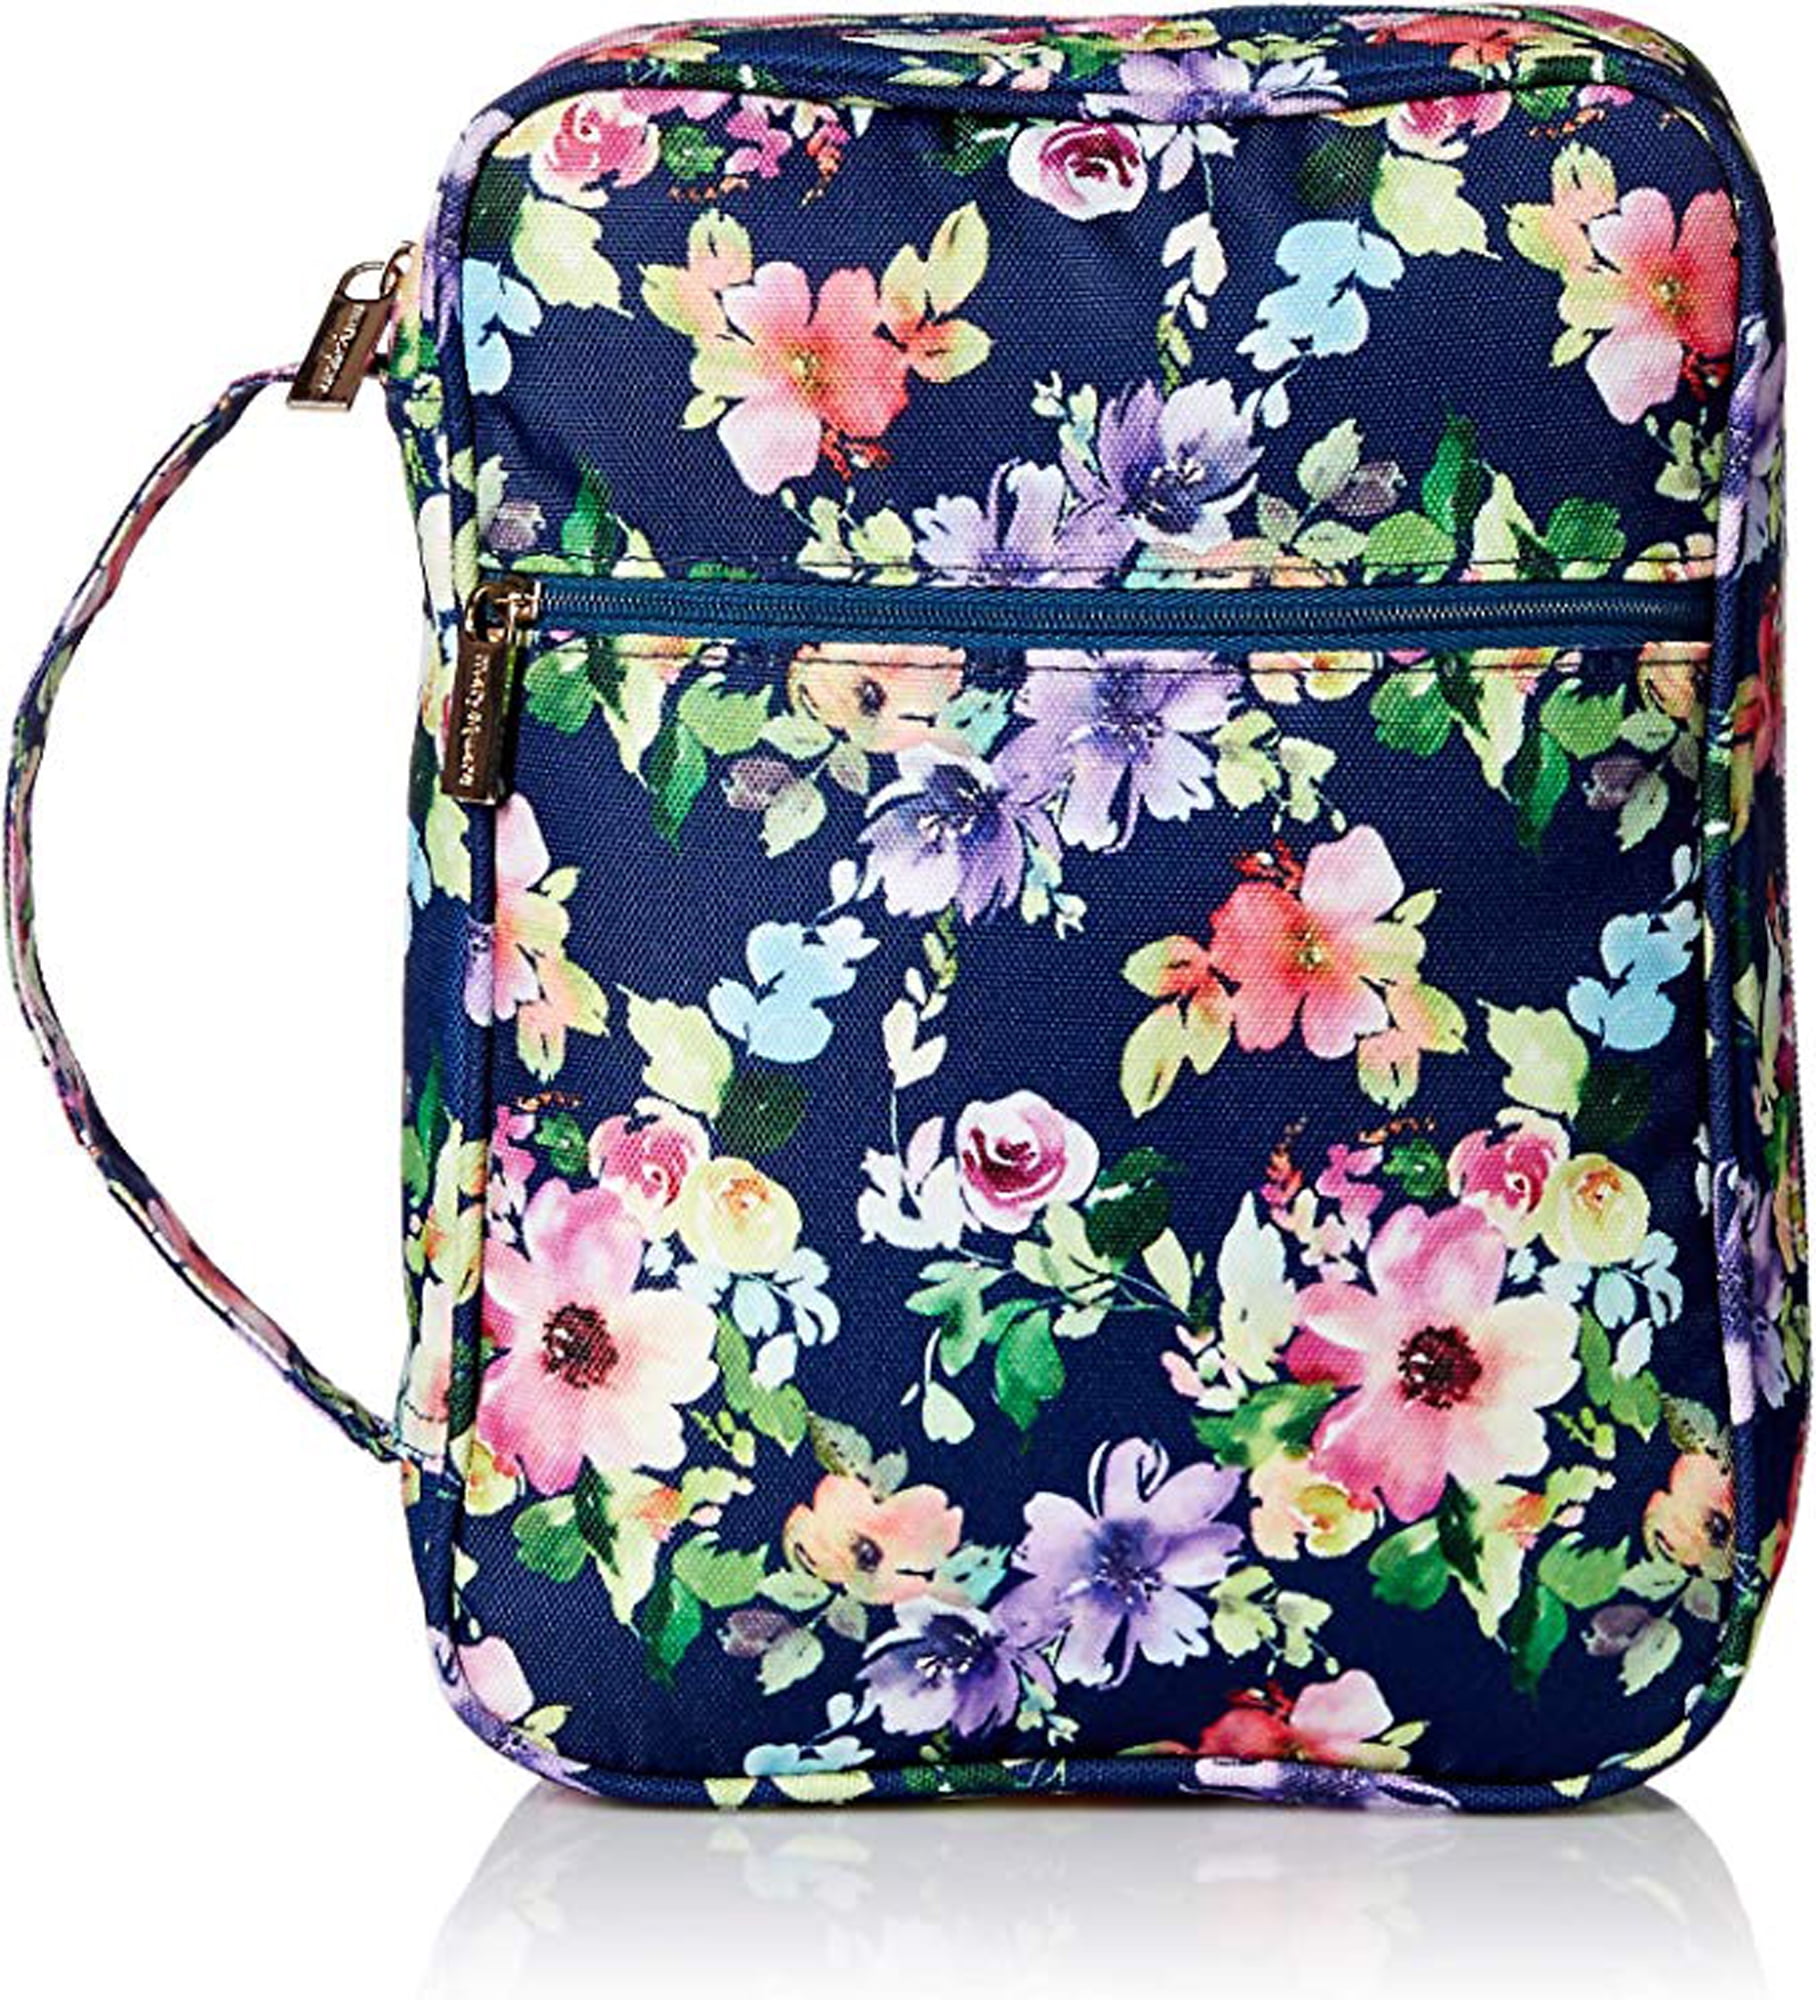 Mary Square Charleston Floral Pattern 8 x 10.5 Inch Polyester Zippered ...